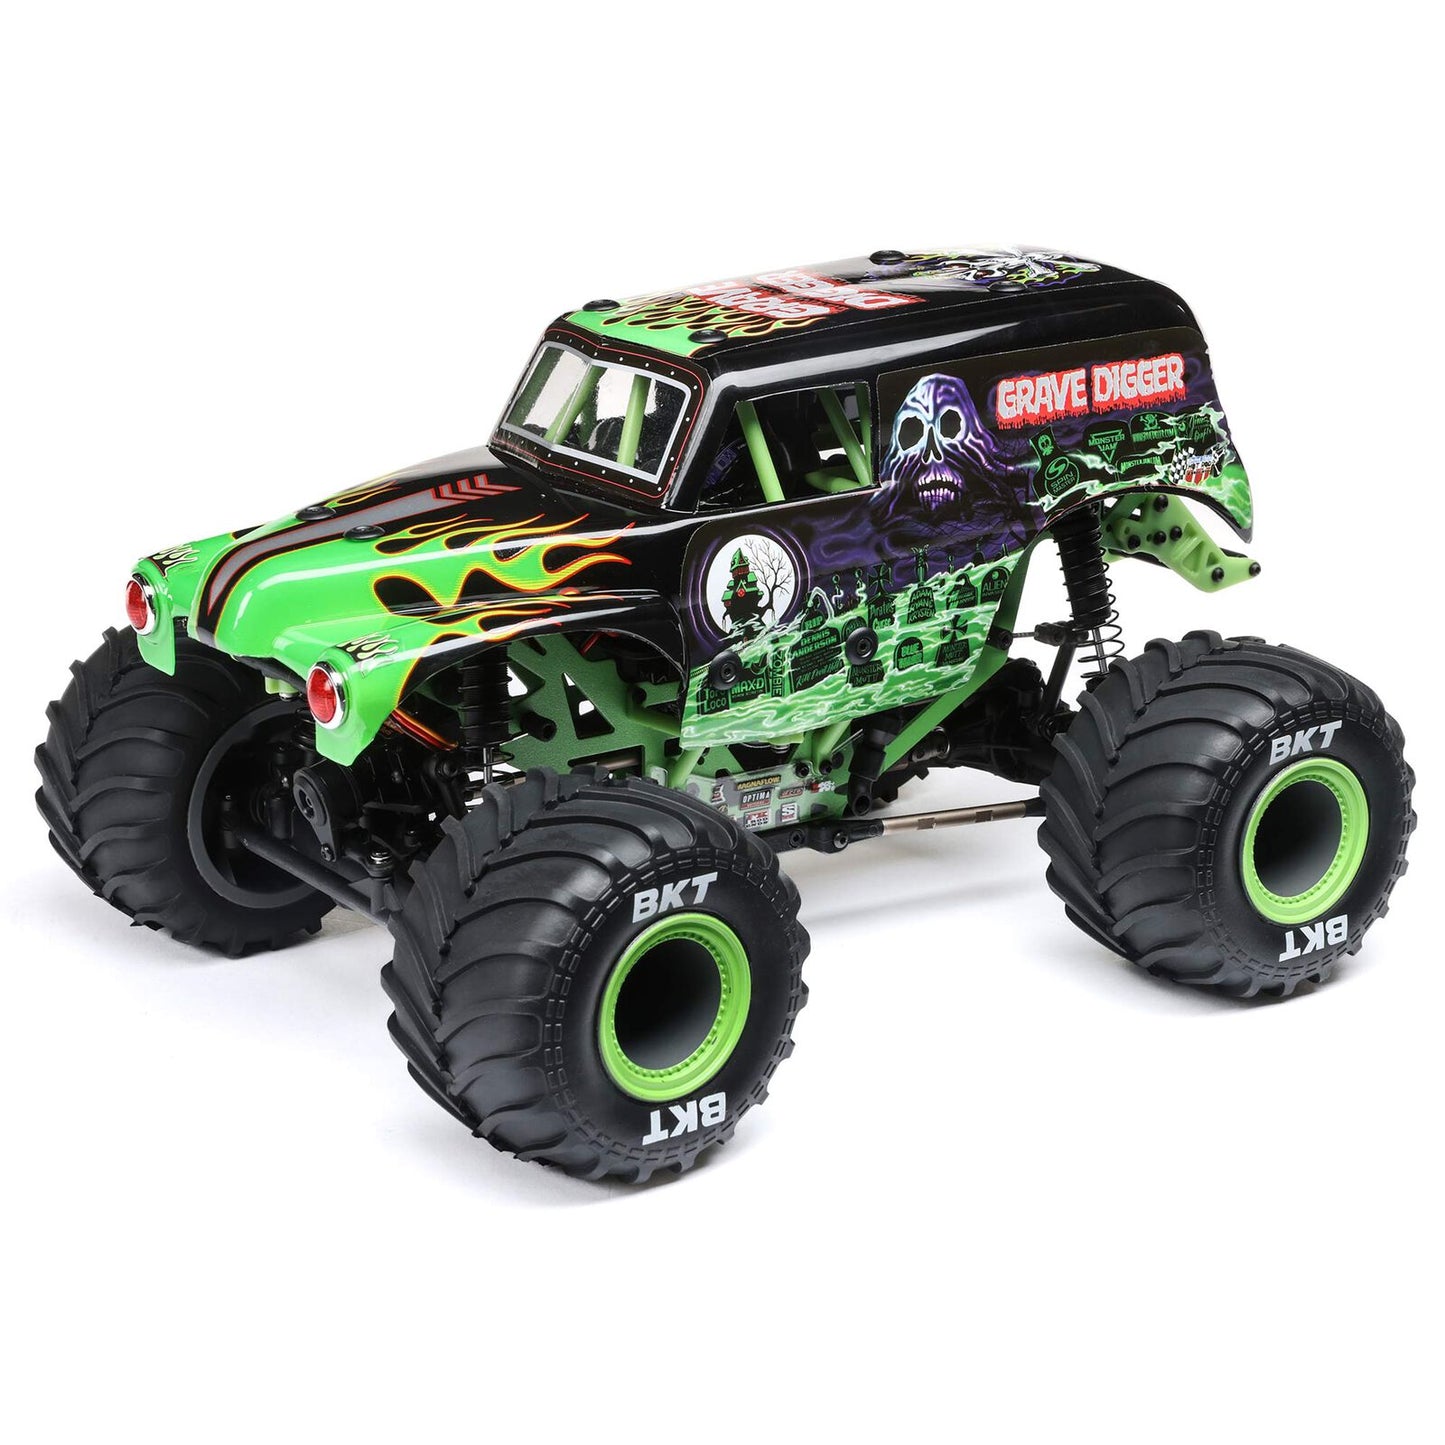 Losi 1/18 Mini LMT 4X4 Brushed Monster Truck RTR, Grave Digger - LOS01026T1